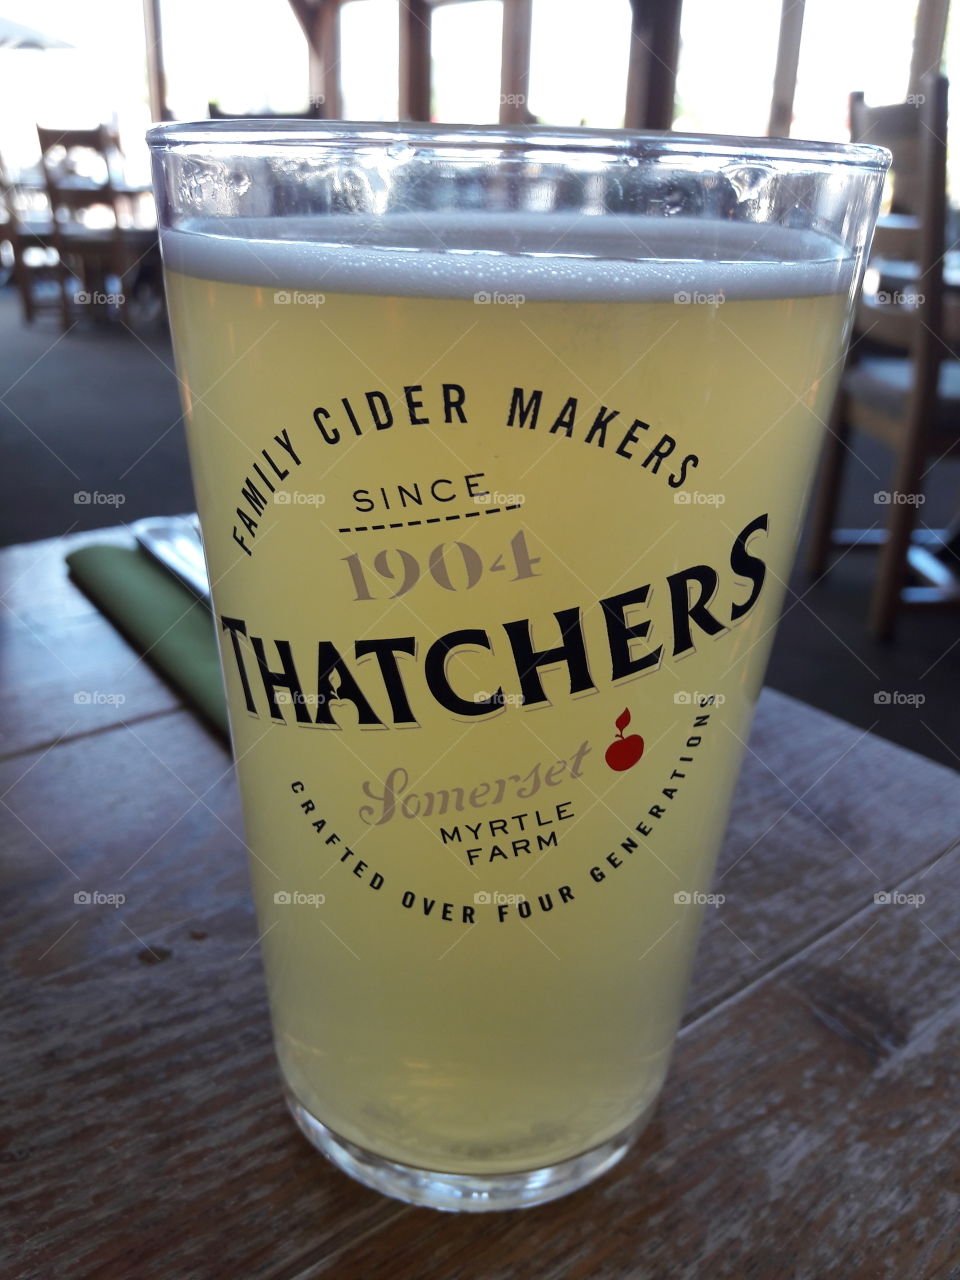 railway inn Sandford in somerset and a pint of thatchers Haze. Pub is situated next to thatchers cider farm, what more could you ask for